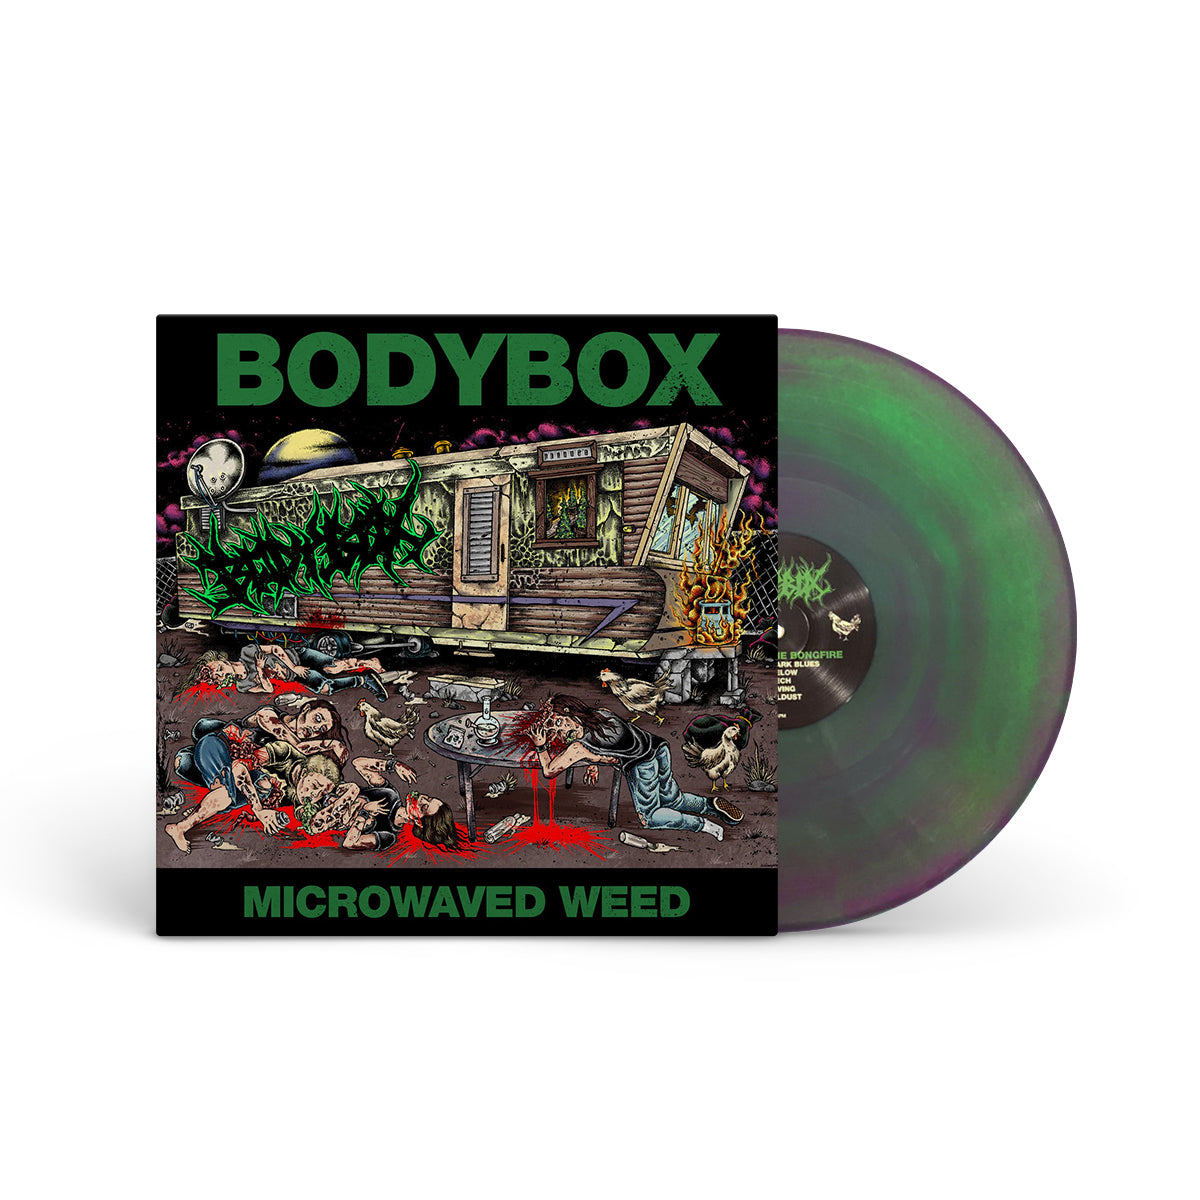 BODYBOX "Microwaved Weed/Through The Bongfire" LP